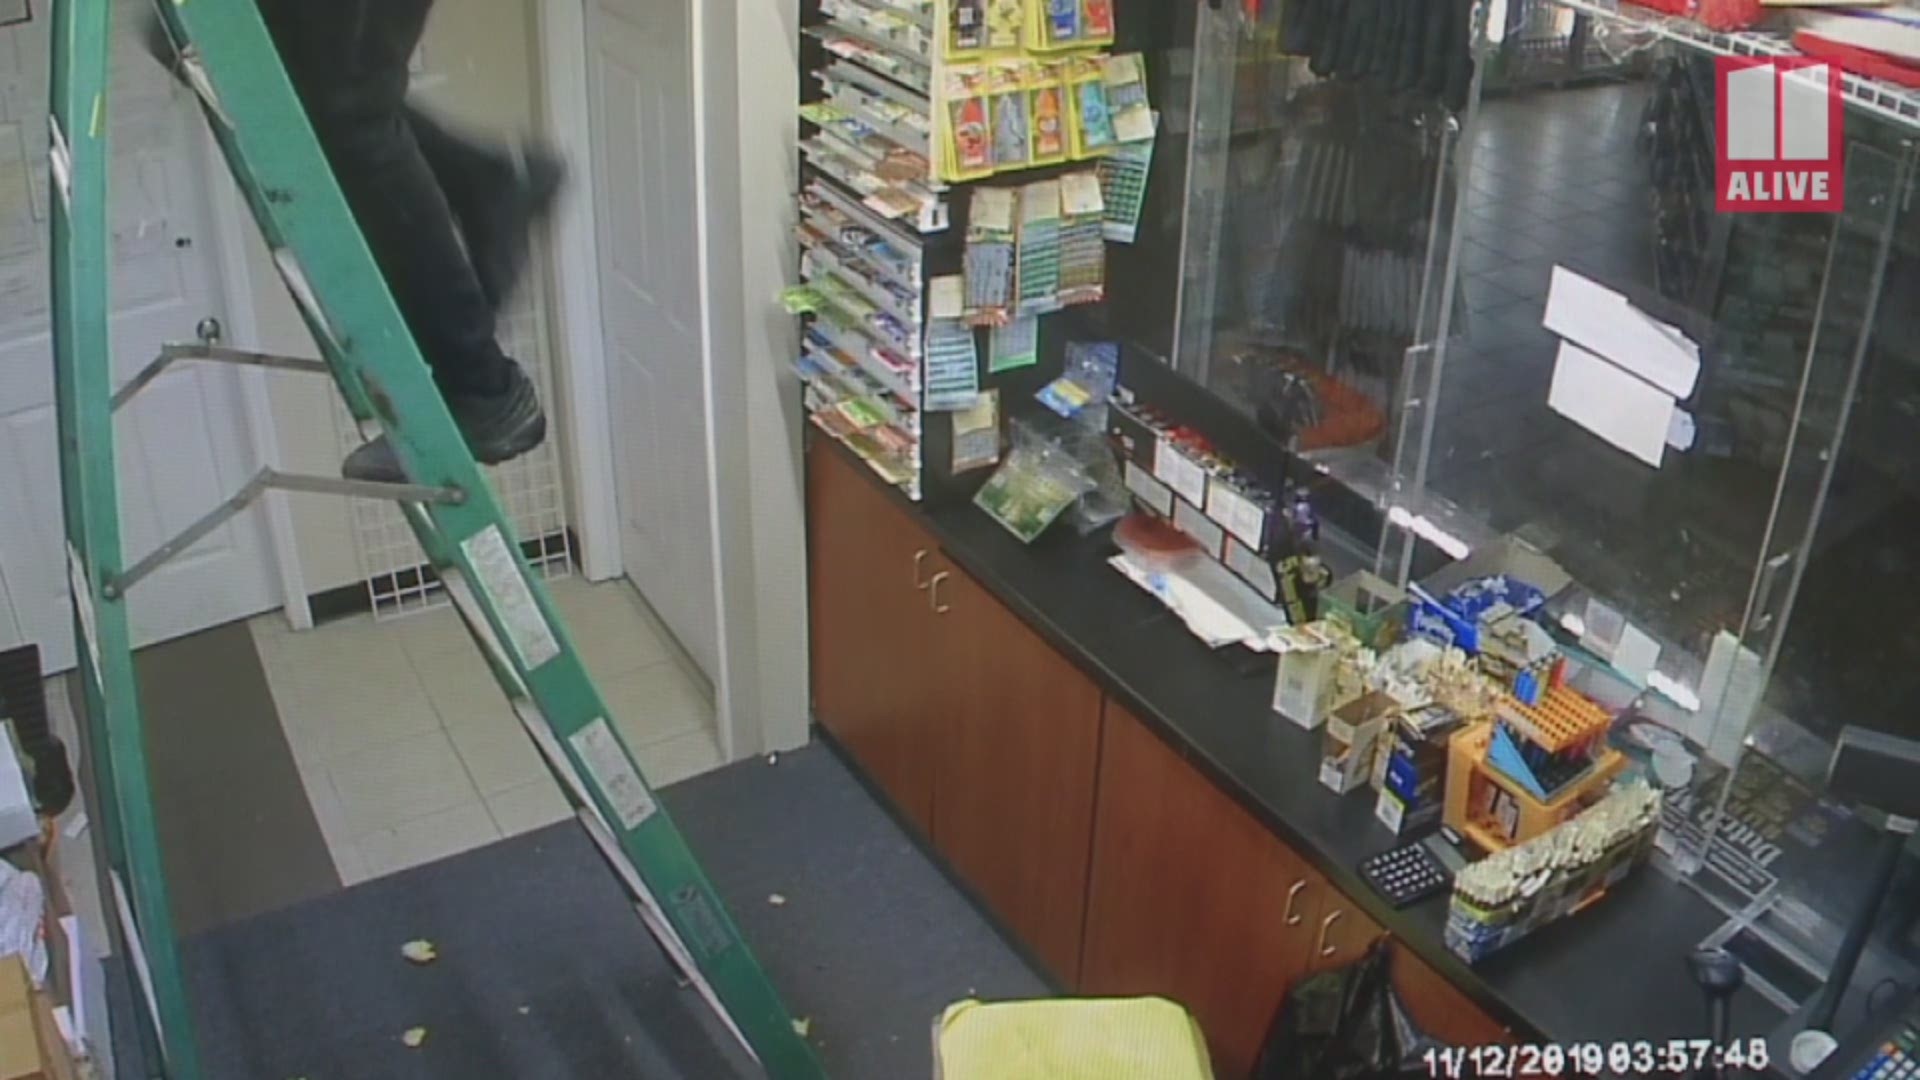 Police are on the hunt for some burglars who cut a hole in the roof of a store and stole tens of thousands of dollars in merchandise. But, police said he slipped up.